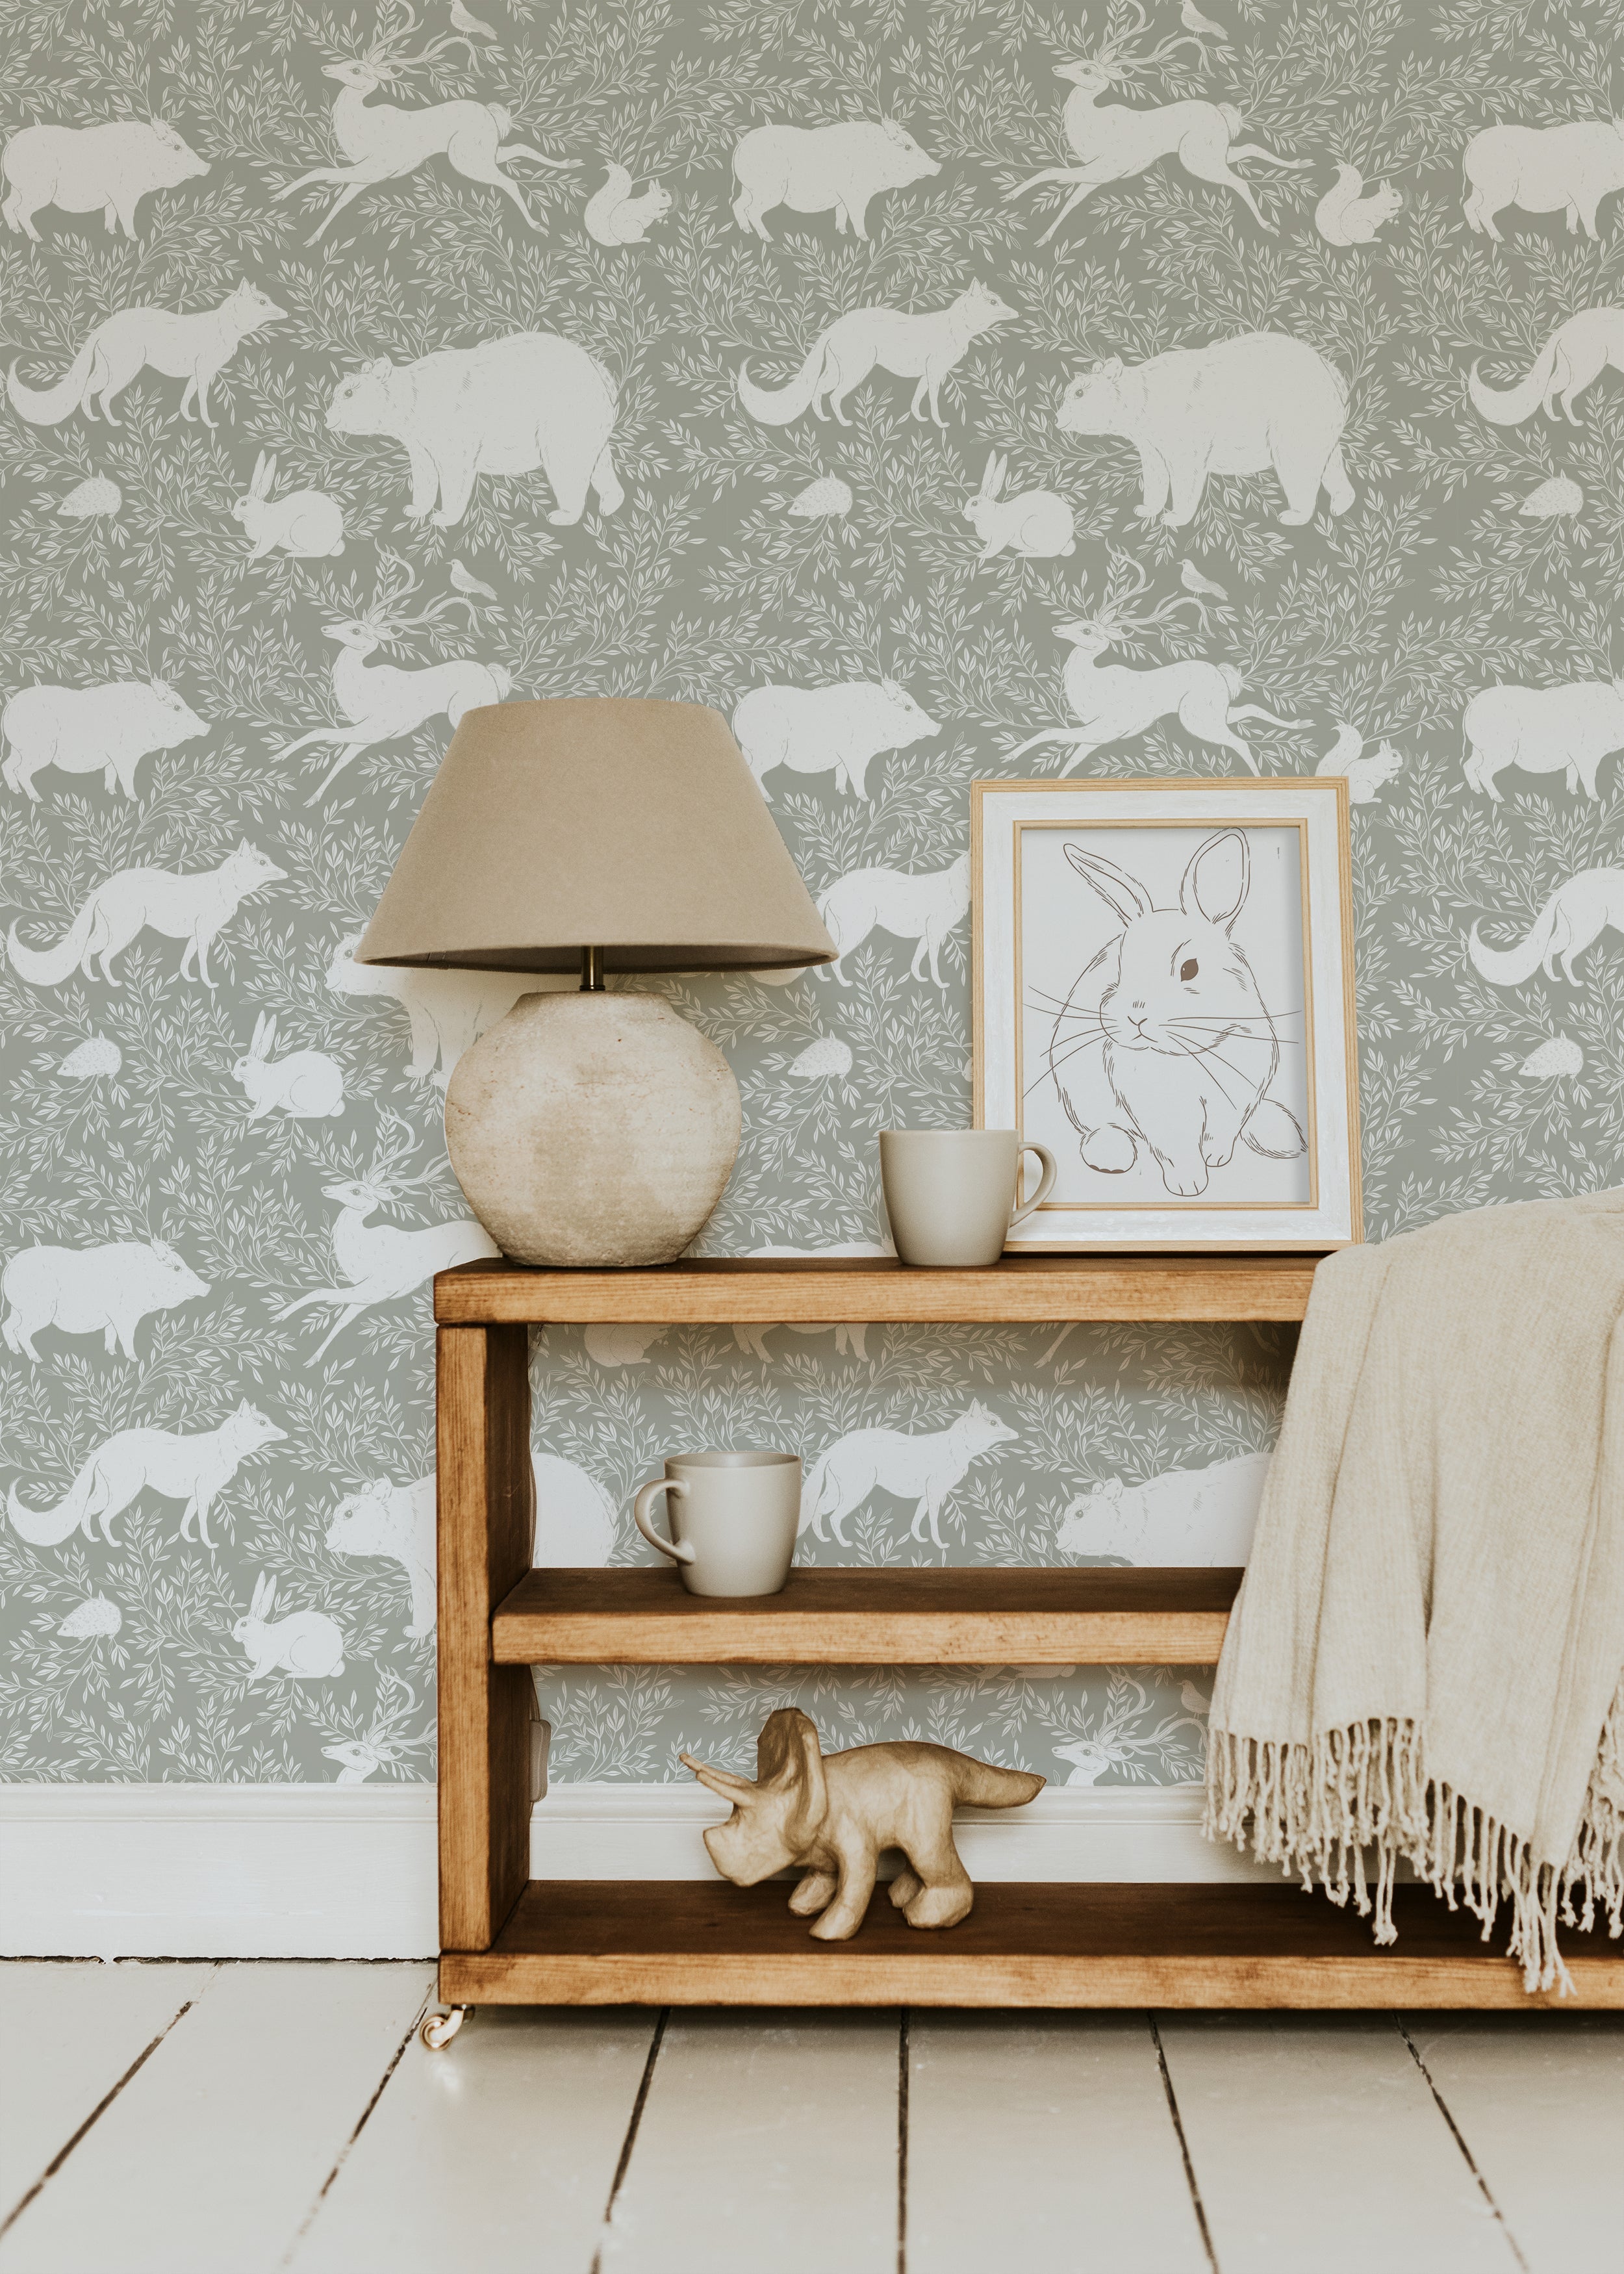 A cozy living room setting with a wooden shelf, ceramic lamp, and framed rabbit illustration in front of a green wallpaper featuring white woodland animals such as bears, foxes, and rabbits